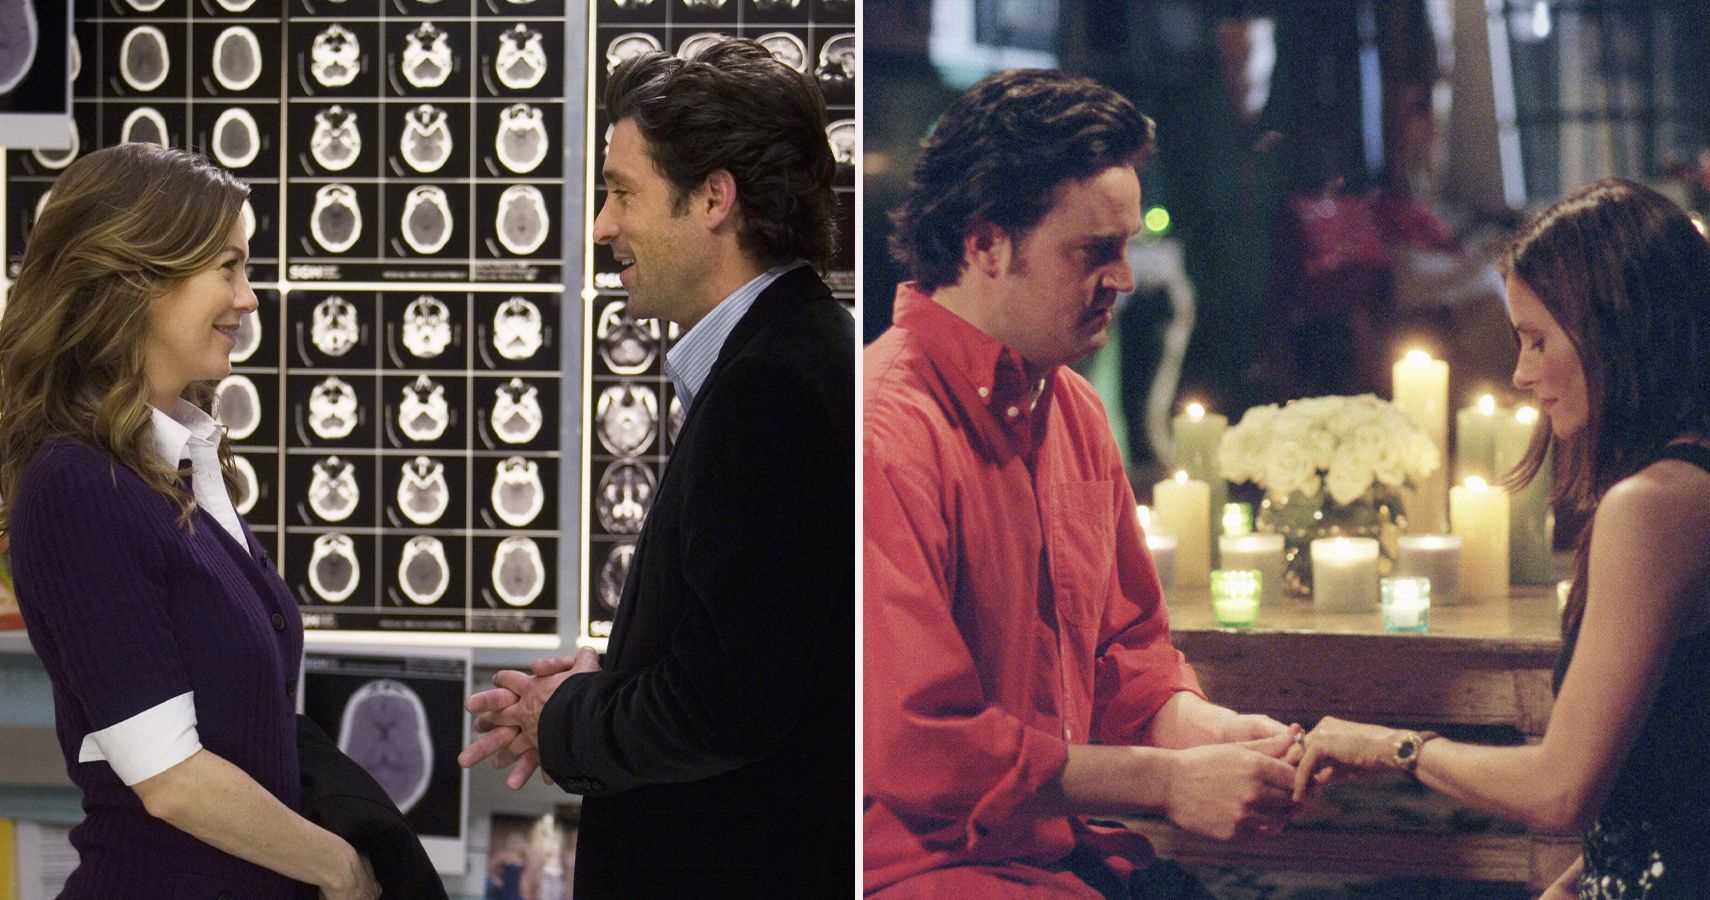 10 Of The Best TV Proposal Scenes Of All Time Ranked